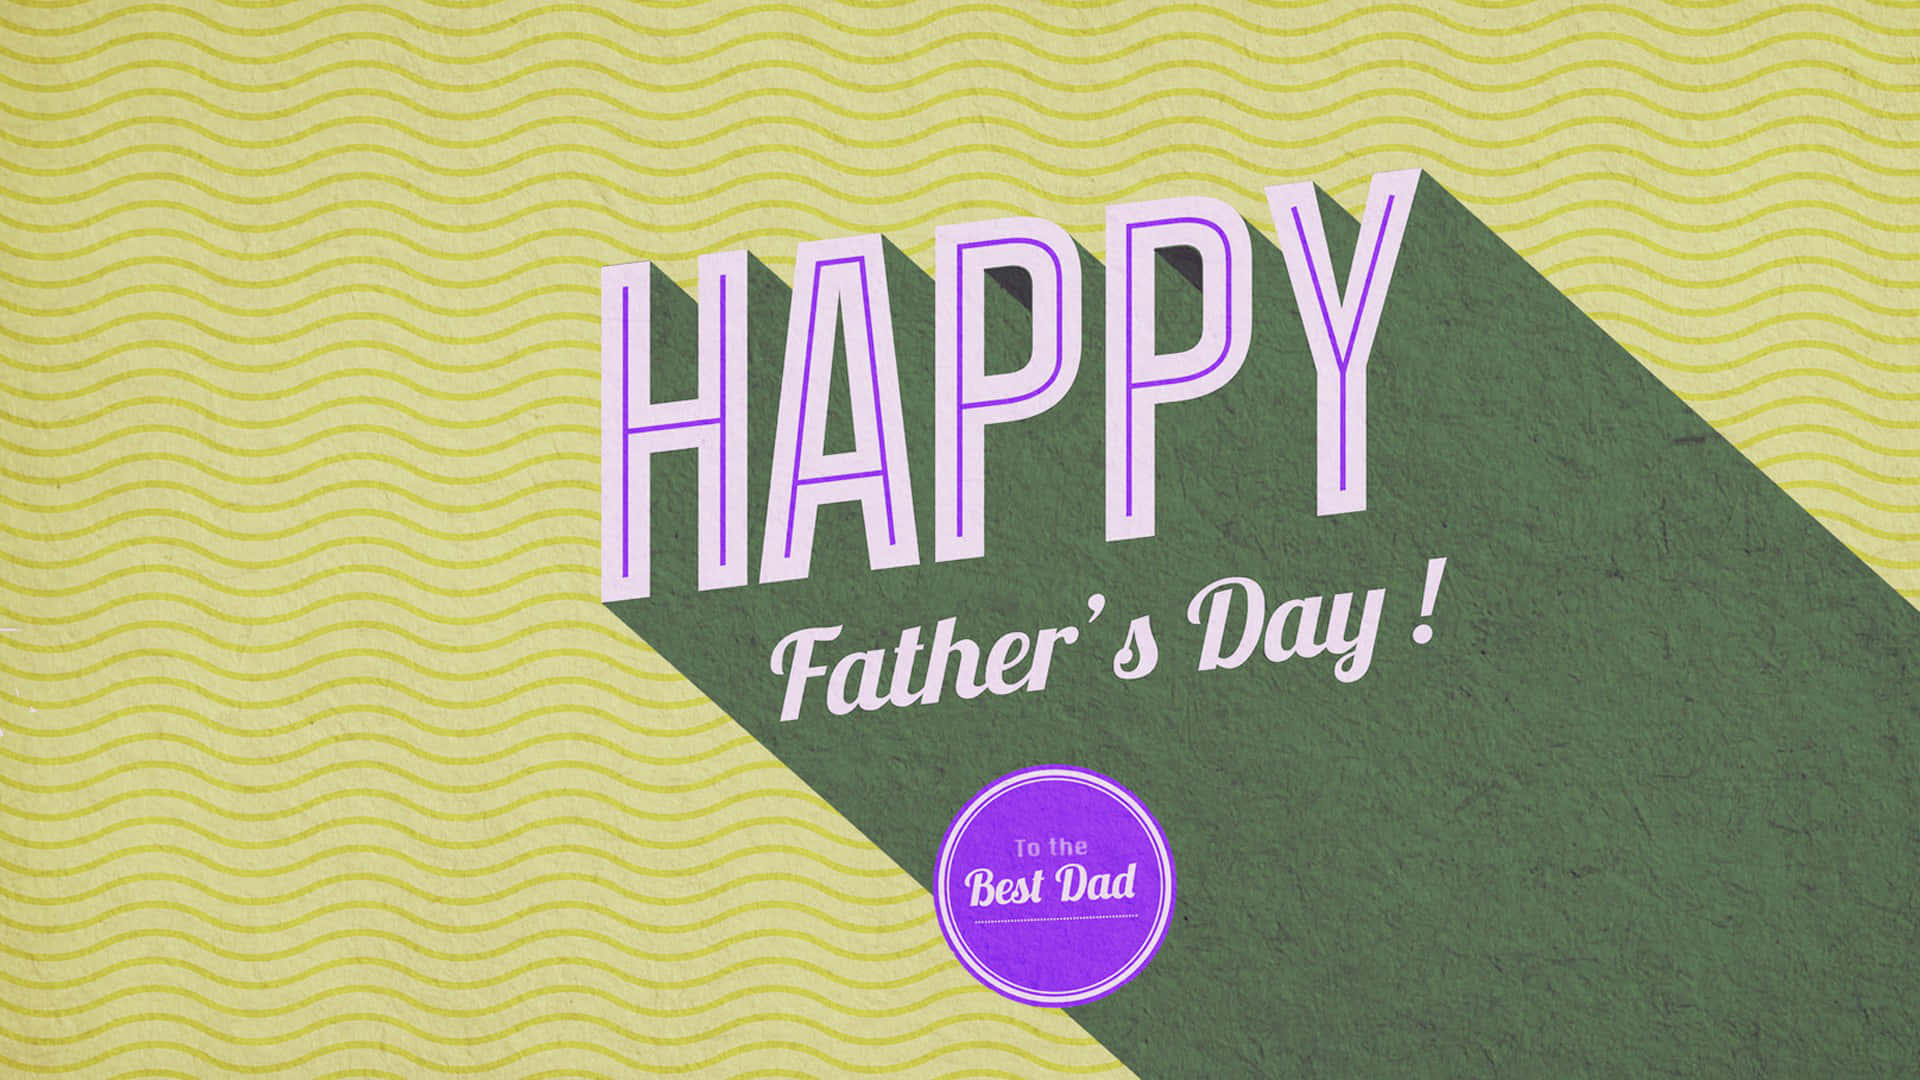 Happy Father's Day Card - Kostenloses Vector 208779